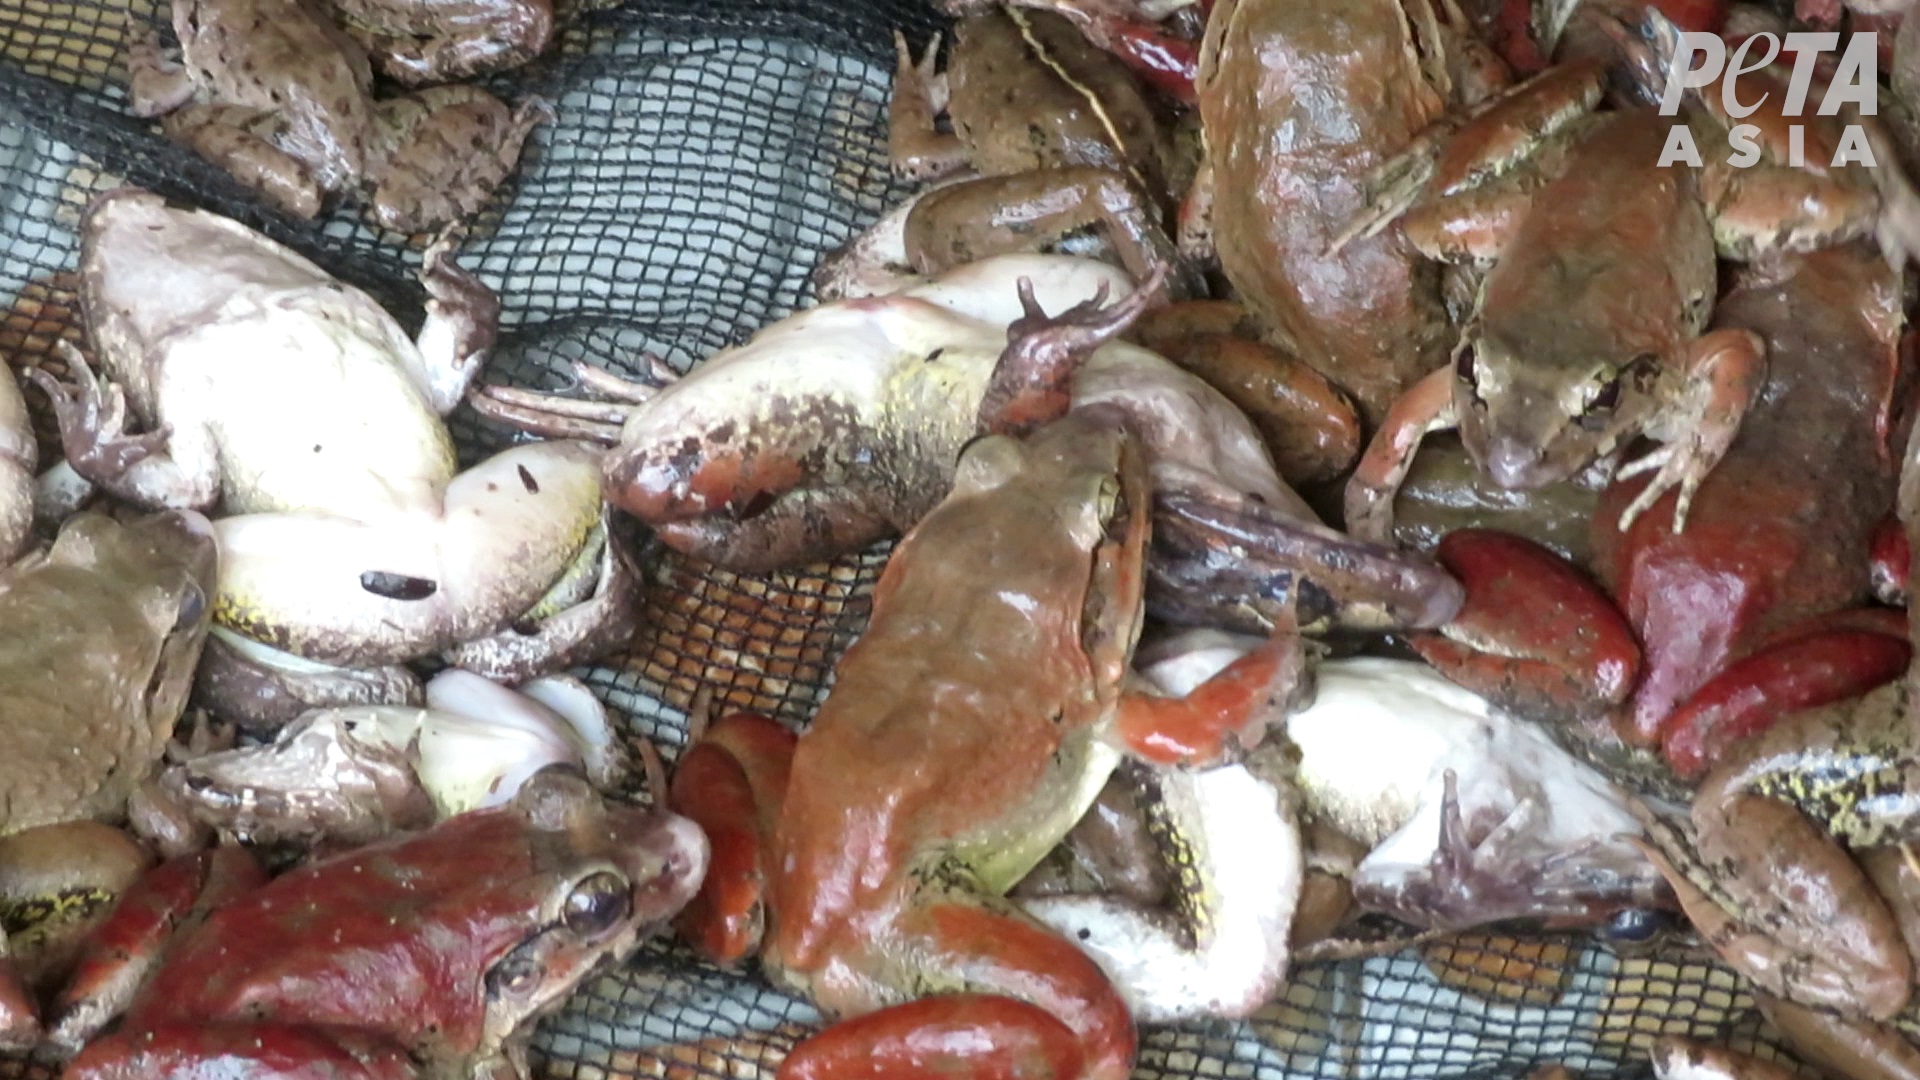 PETA Asia Uncovers Cruelty in the Frog-Legs Industry